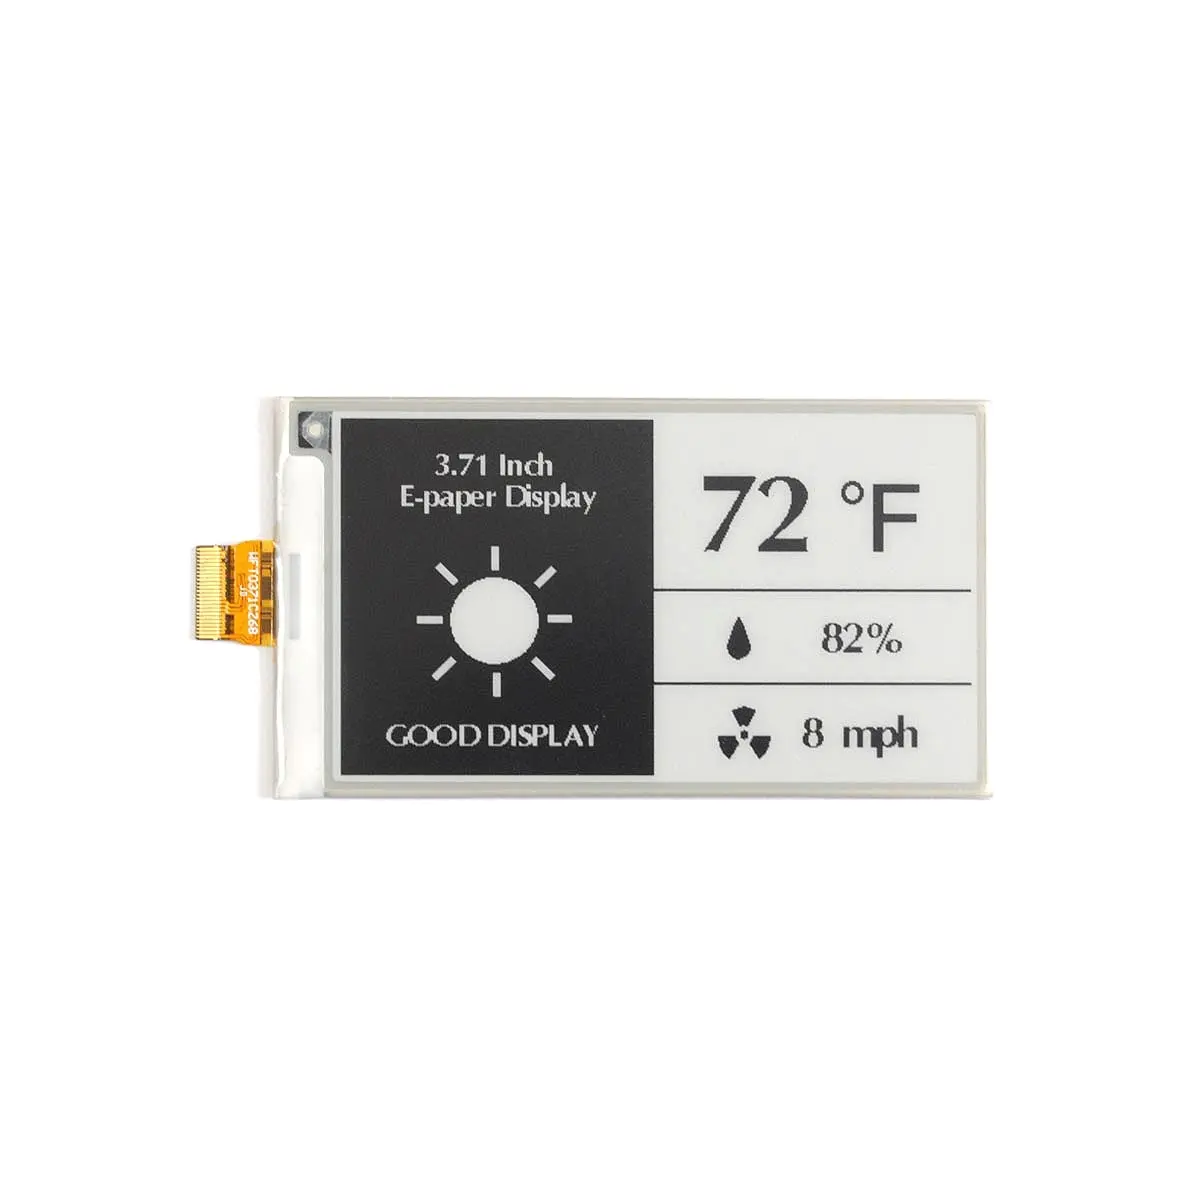 Lcd Display Manufacture 3.7 Inch TFT Lcd Fast Update E Paper Eink Display Black White Display For Price Tag GDEW0371W7